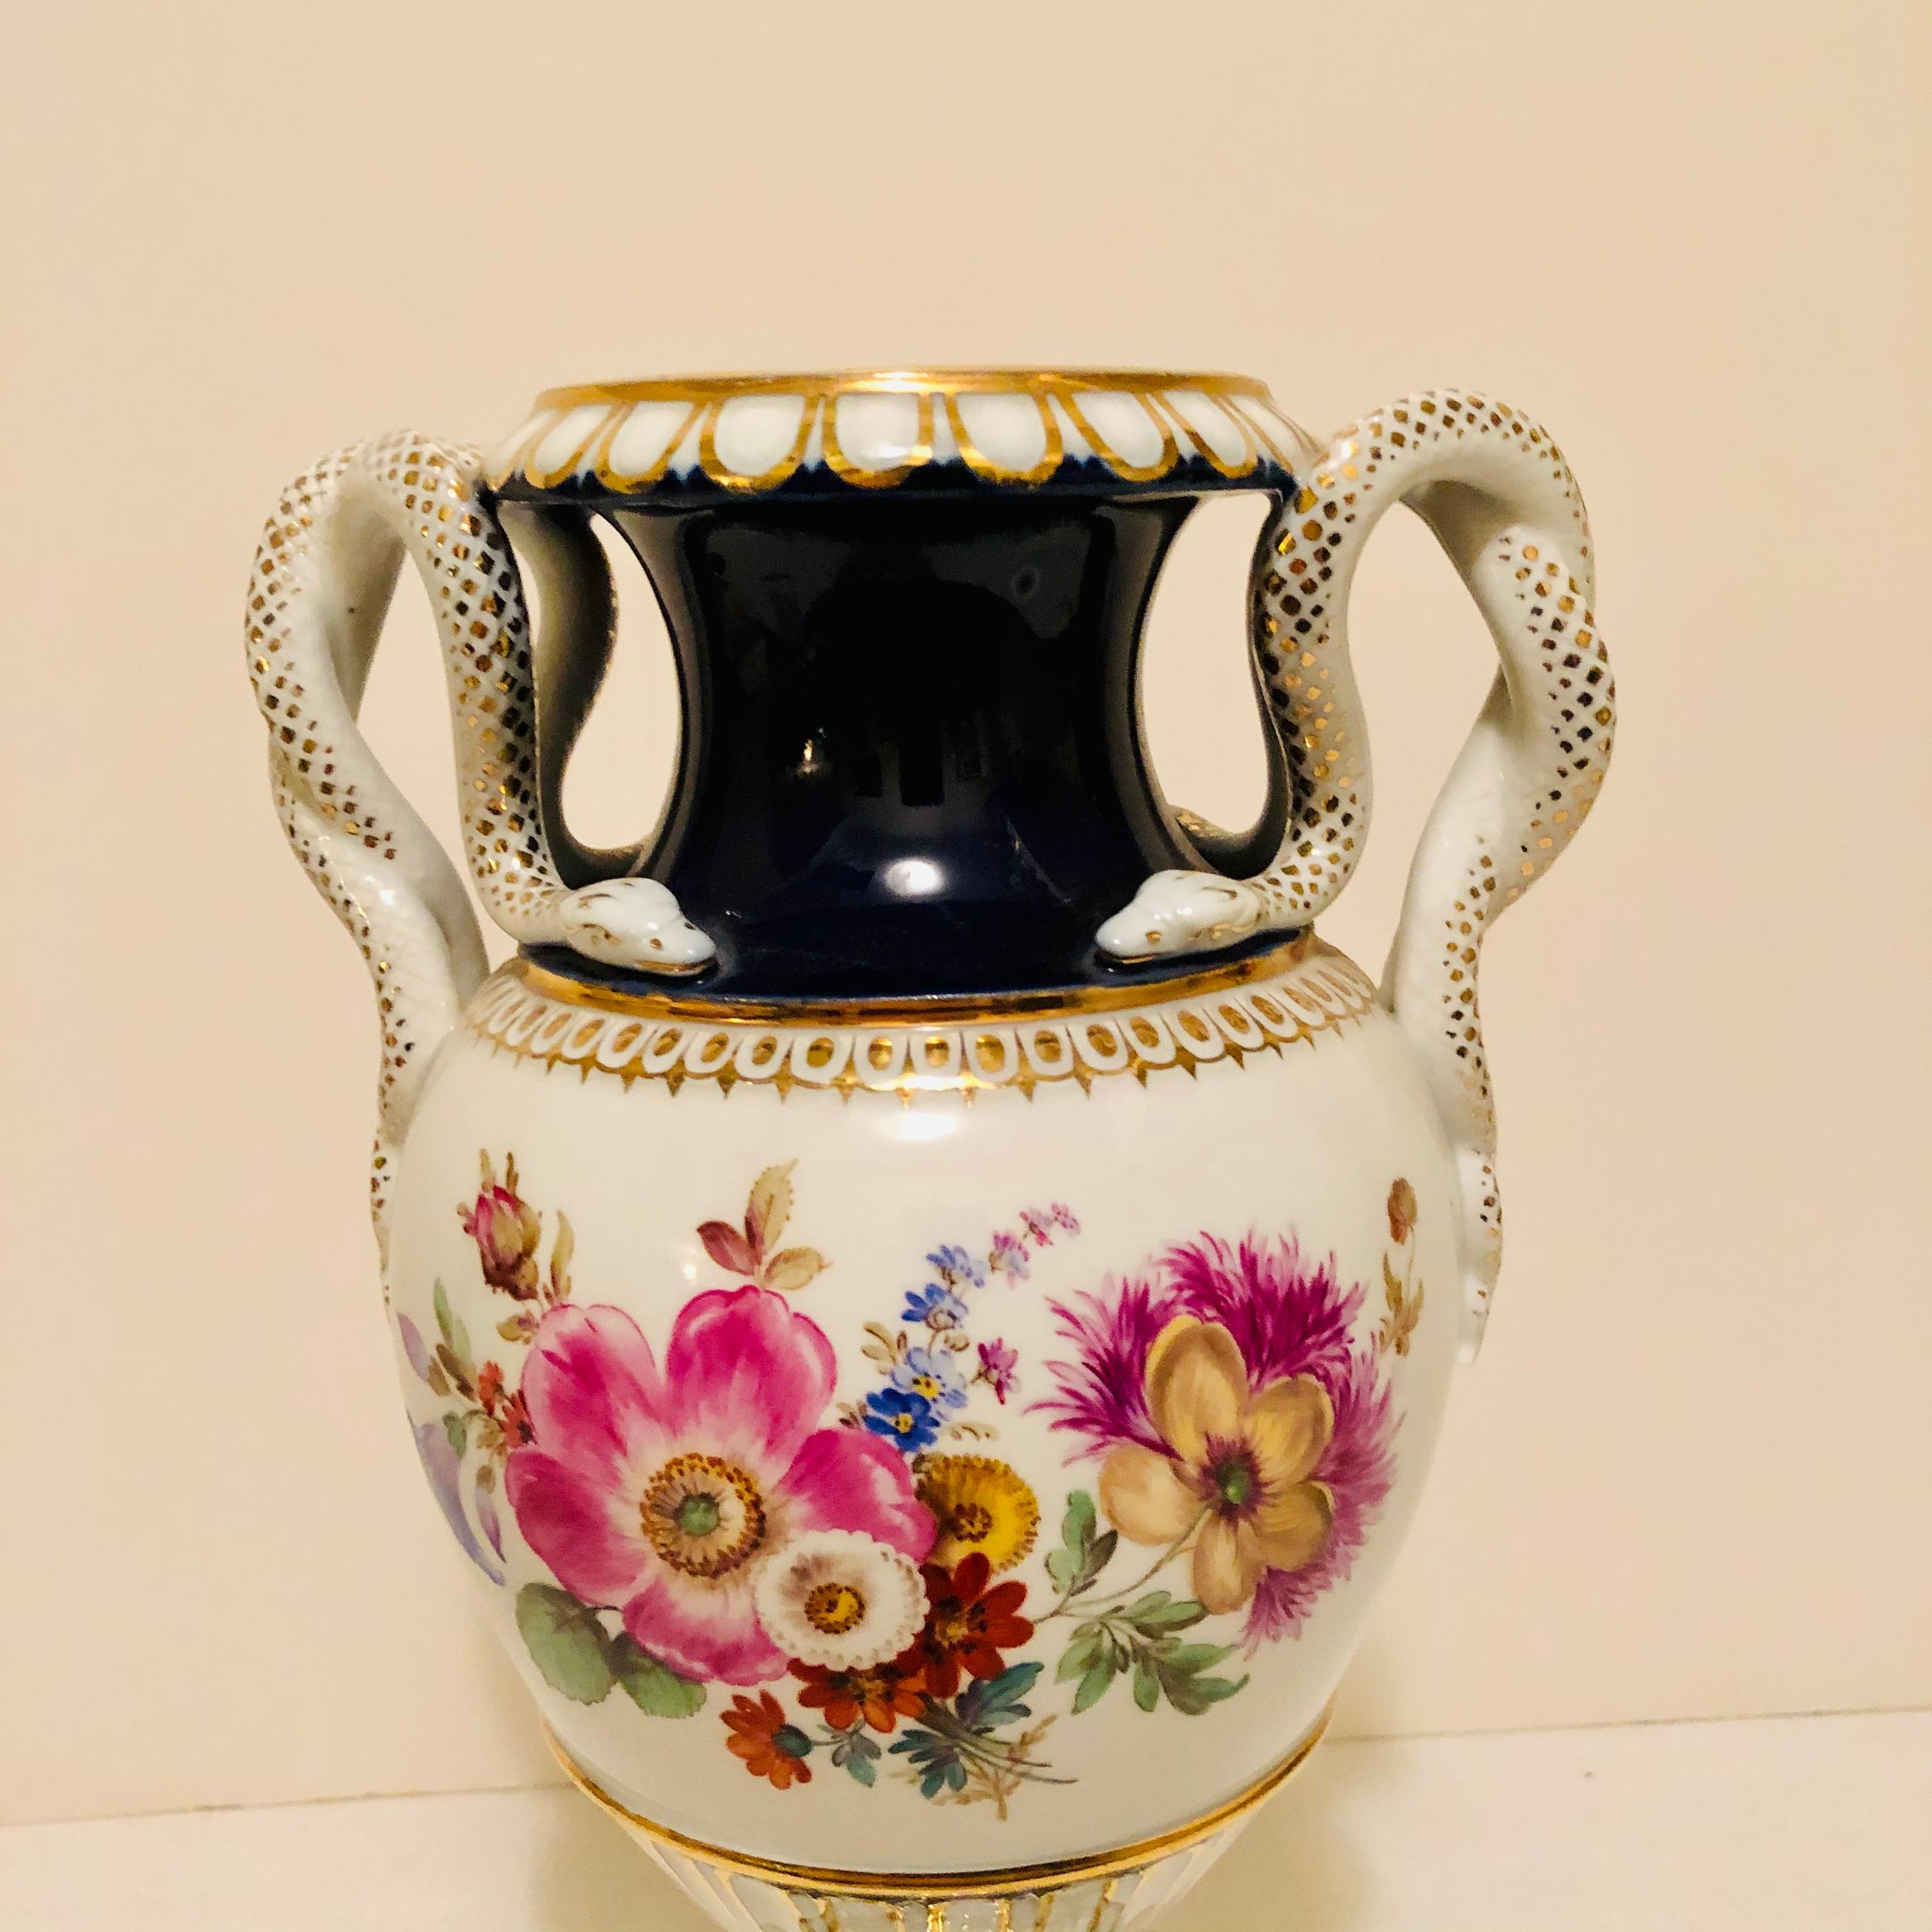 Late 19th Century Meissen Vase with Different Flower Bouquets on Either Side and Snake Handles